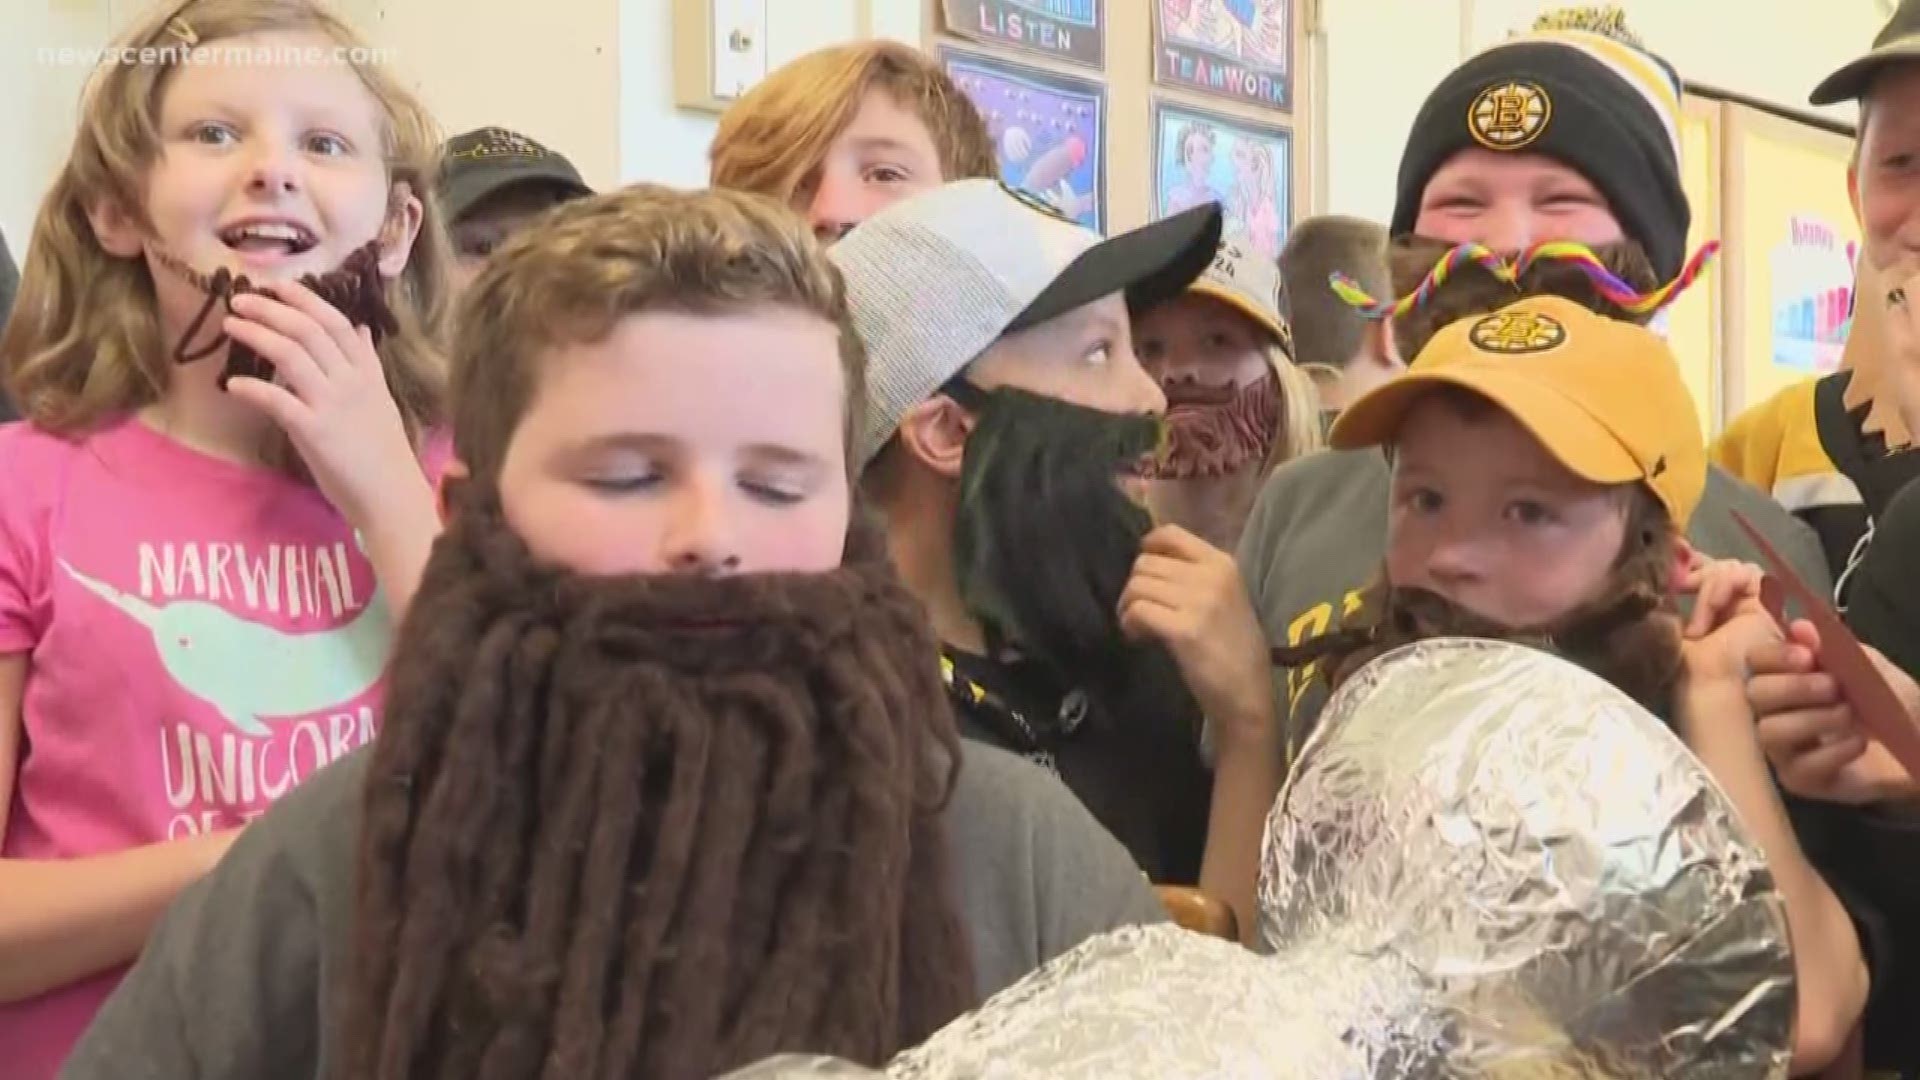 Students in Mr. Brian Gagnon's music class at Fairview Elementary in Auburn "grew" playoff beards to support the Bruins in game seven of the Stanley Cup Final